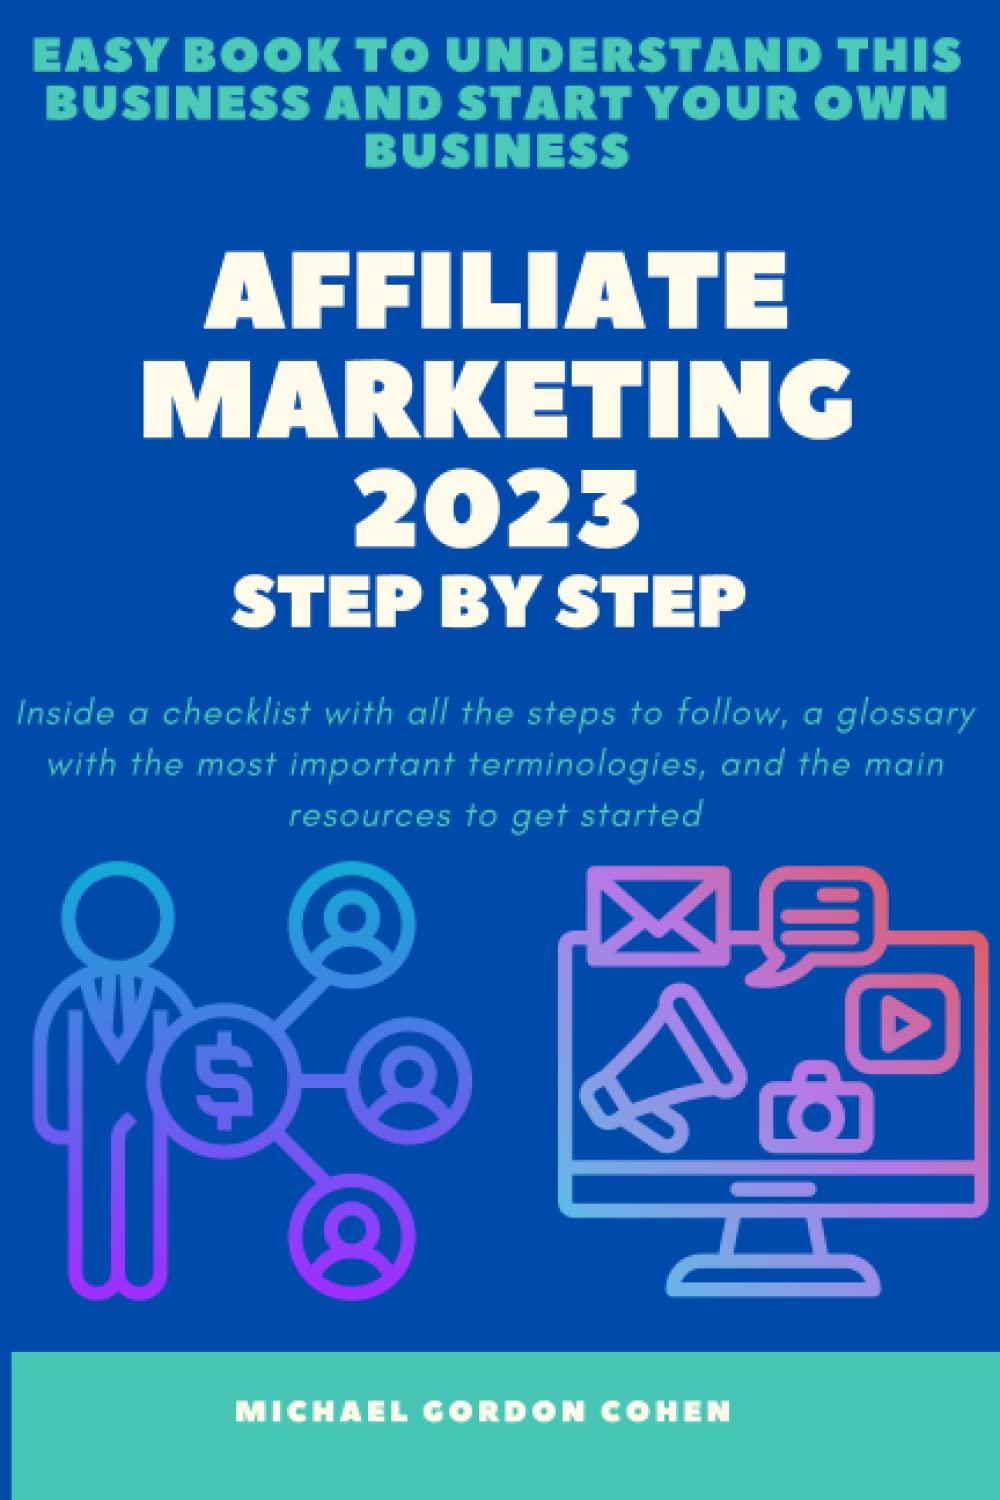 affiliate marketing 2023 step by step easy book to understand this business and starting your own business